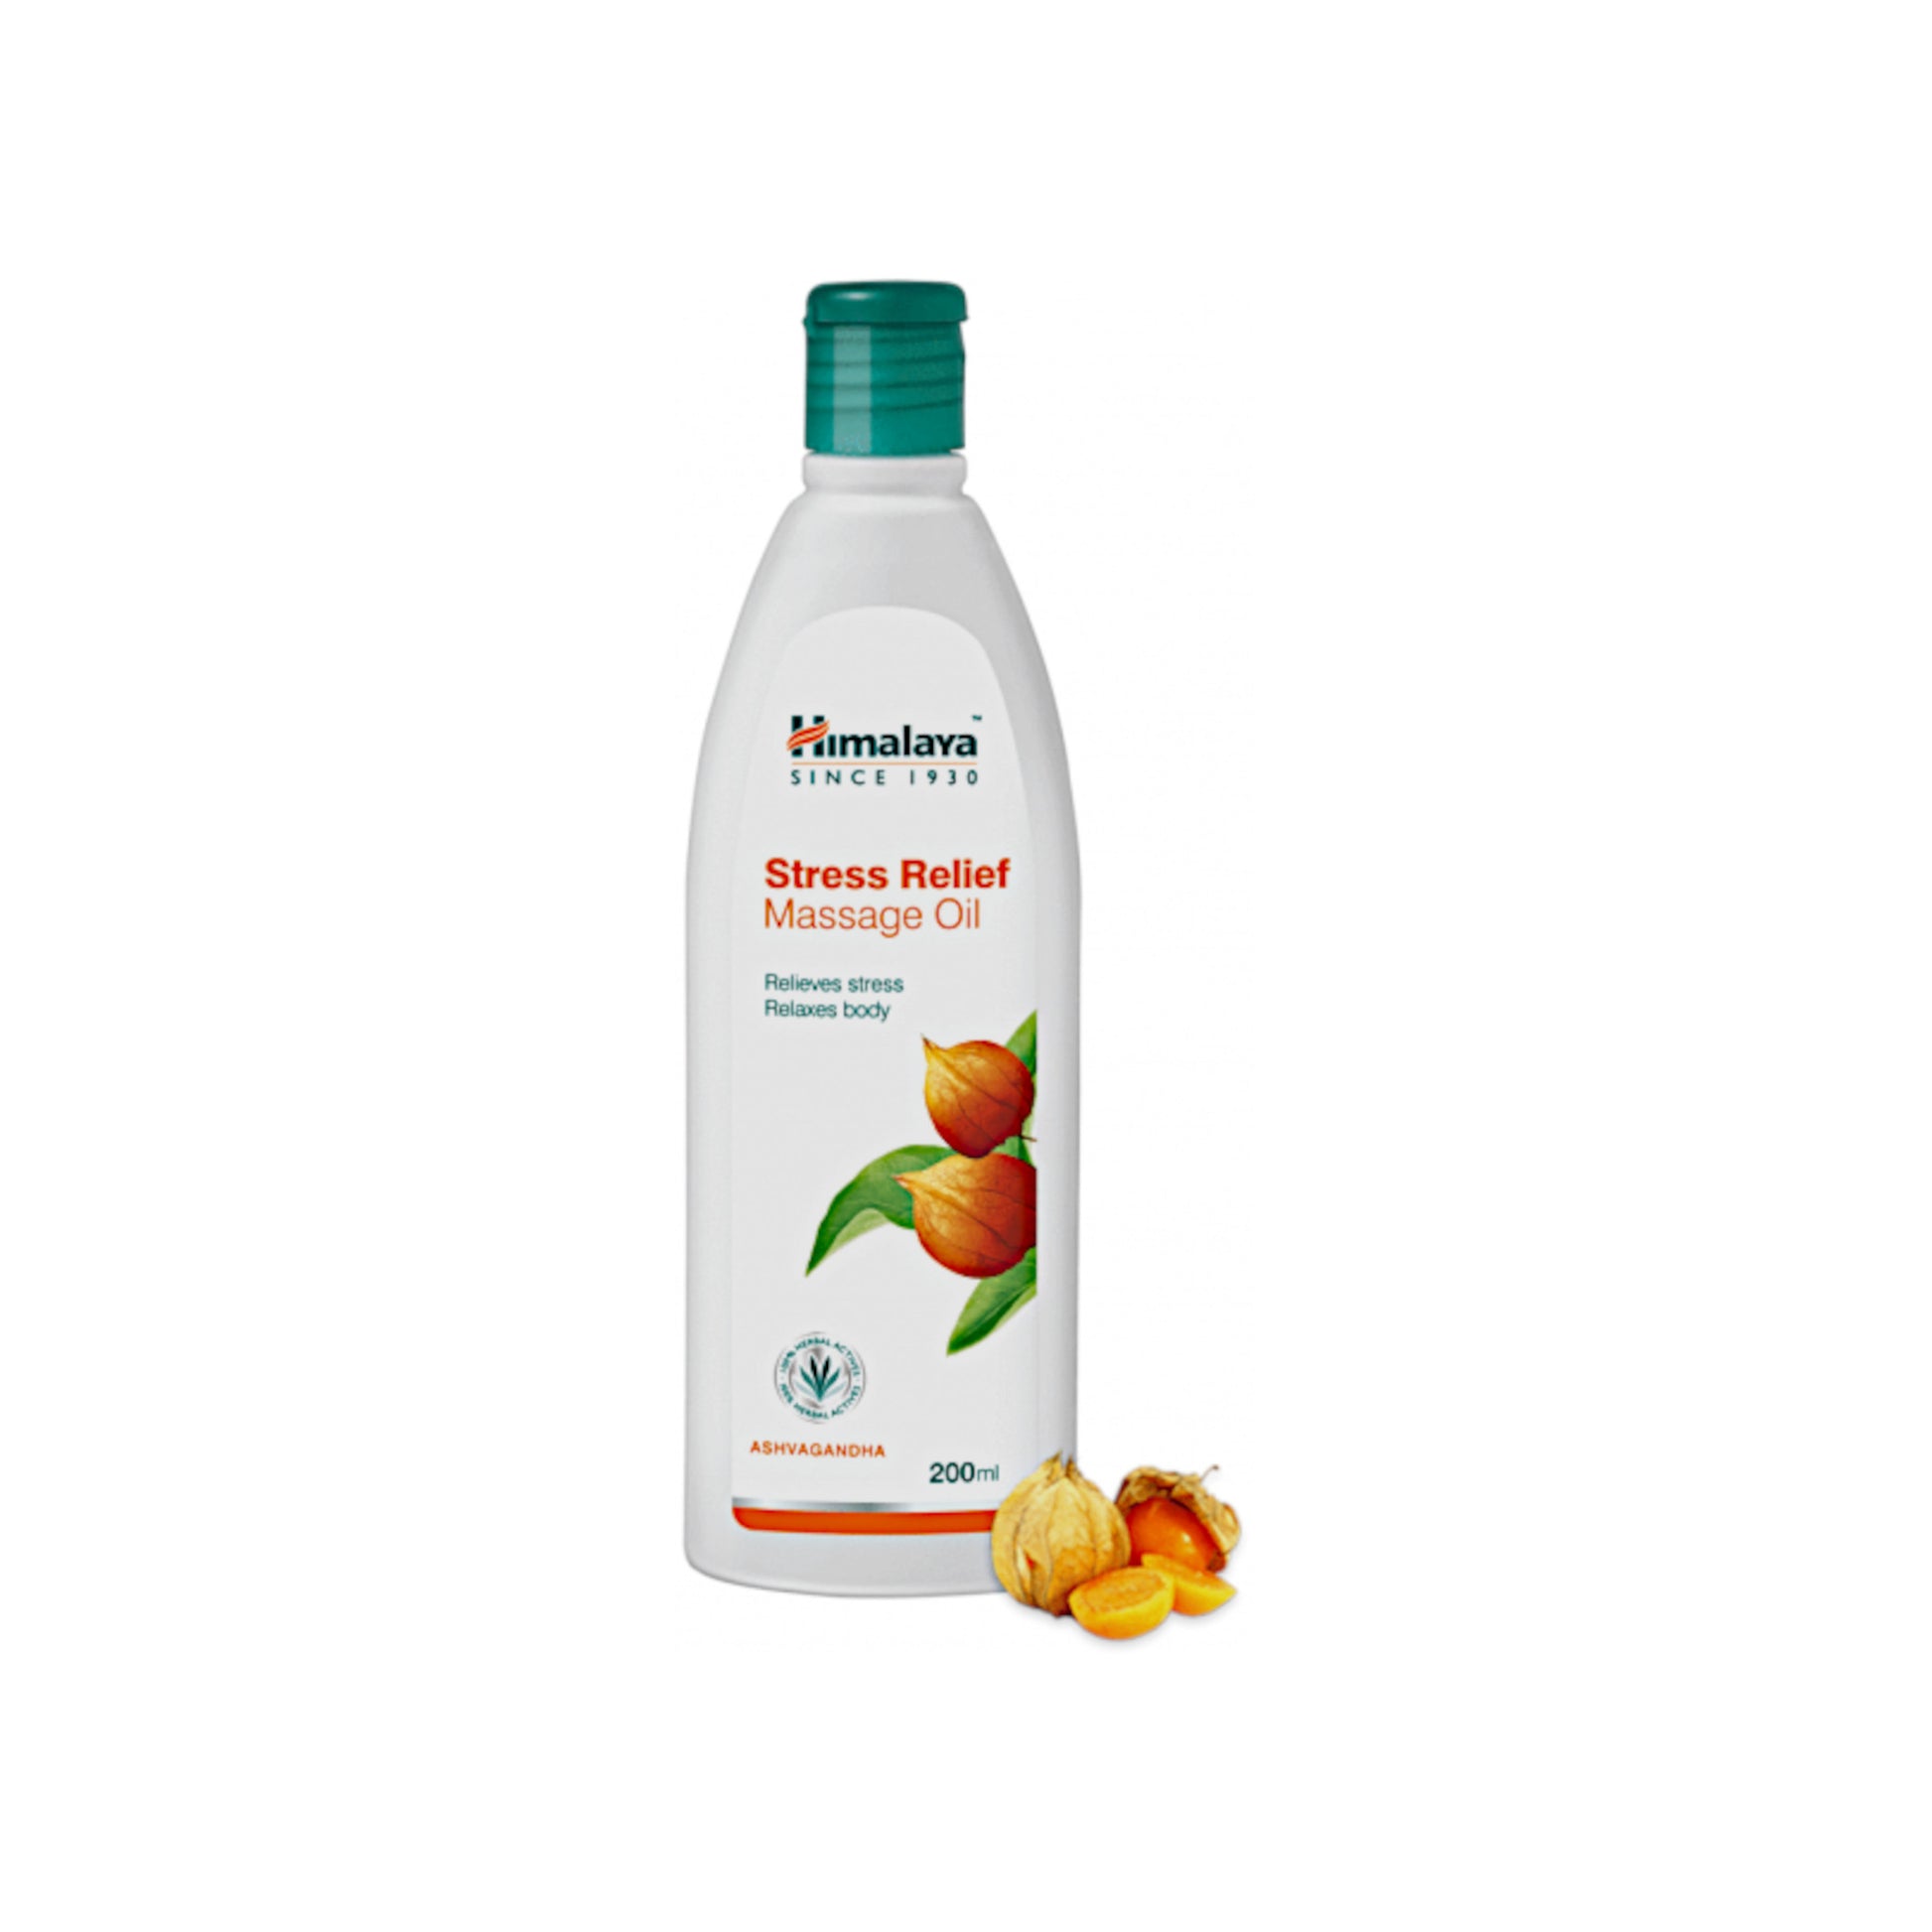 Image: Himalaya Stress Relief Massage Oil 200 ml - Herbal blend for relaxation and well-being.